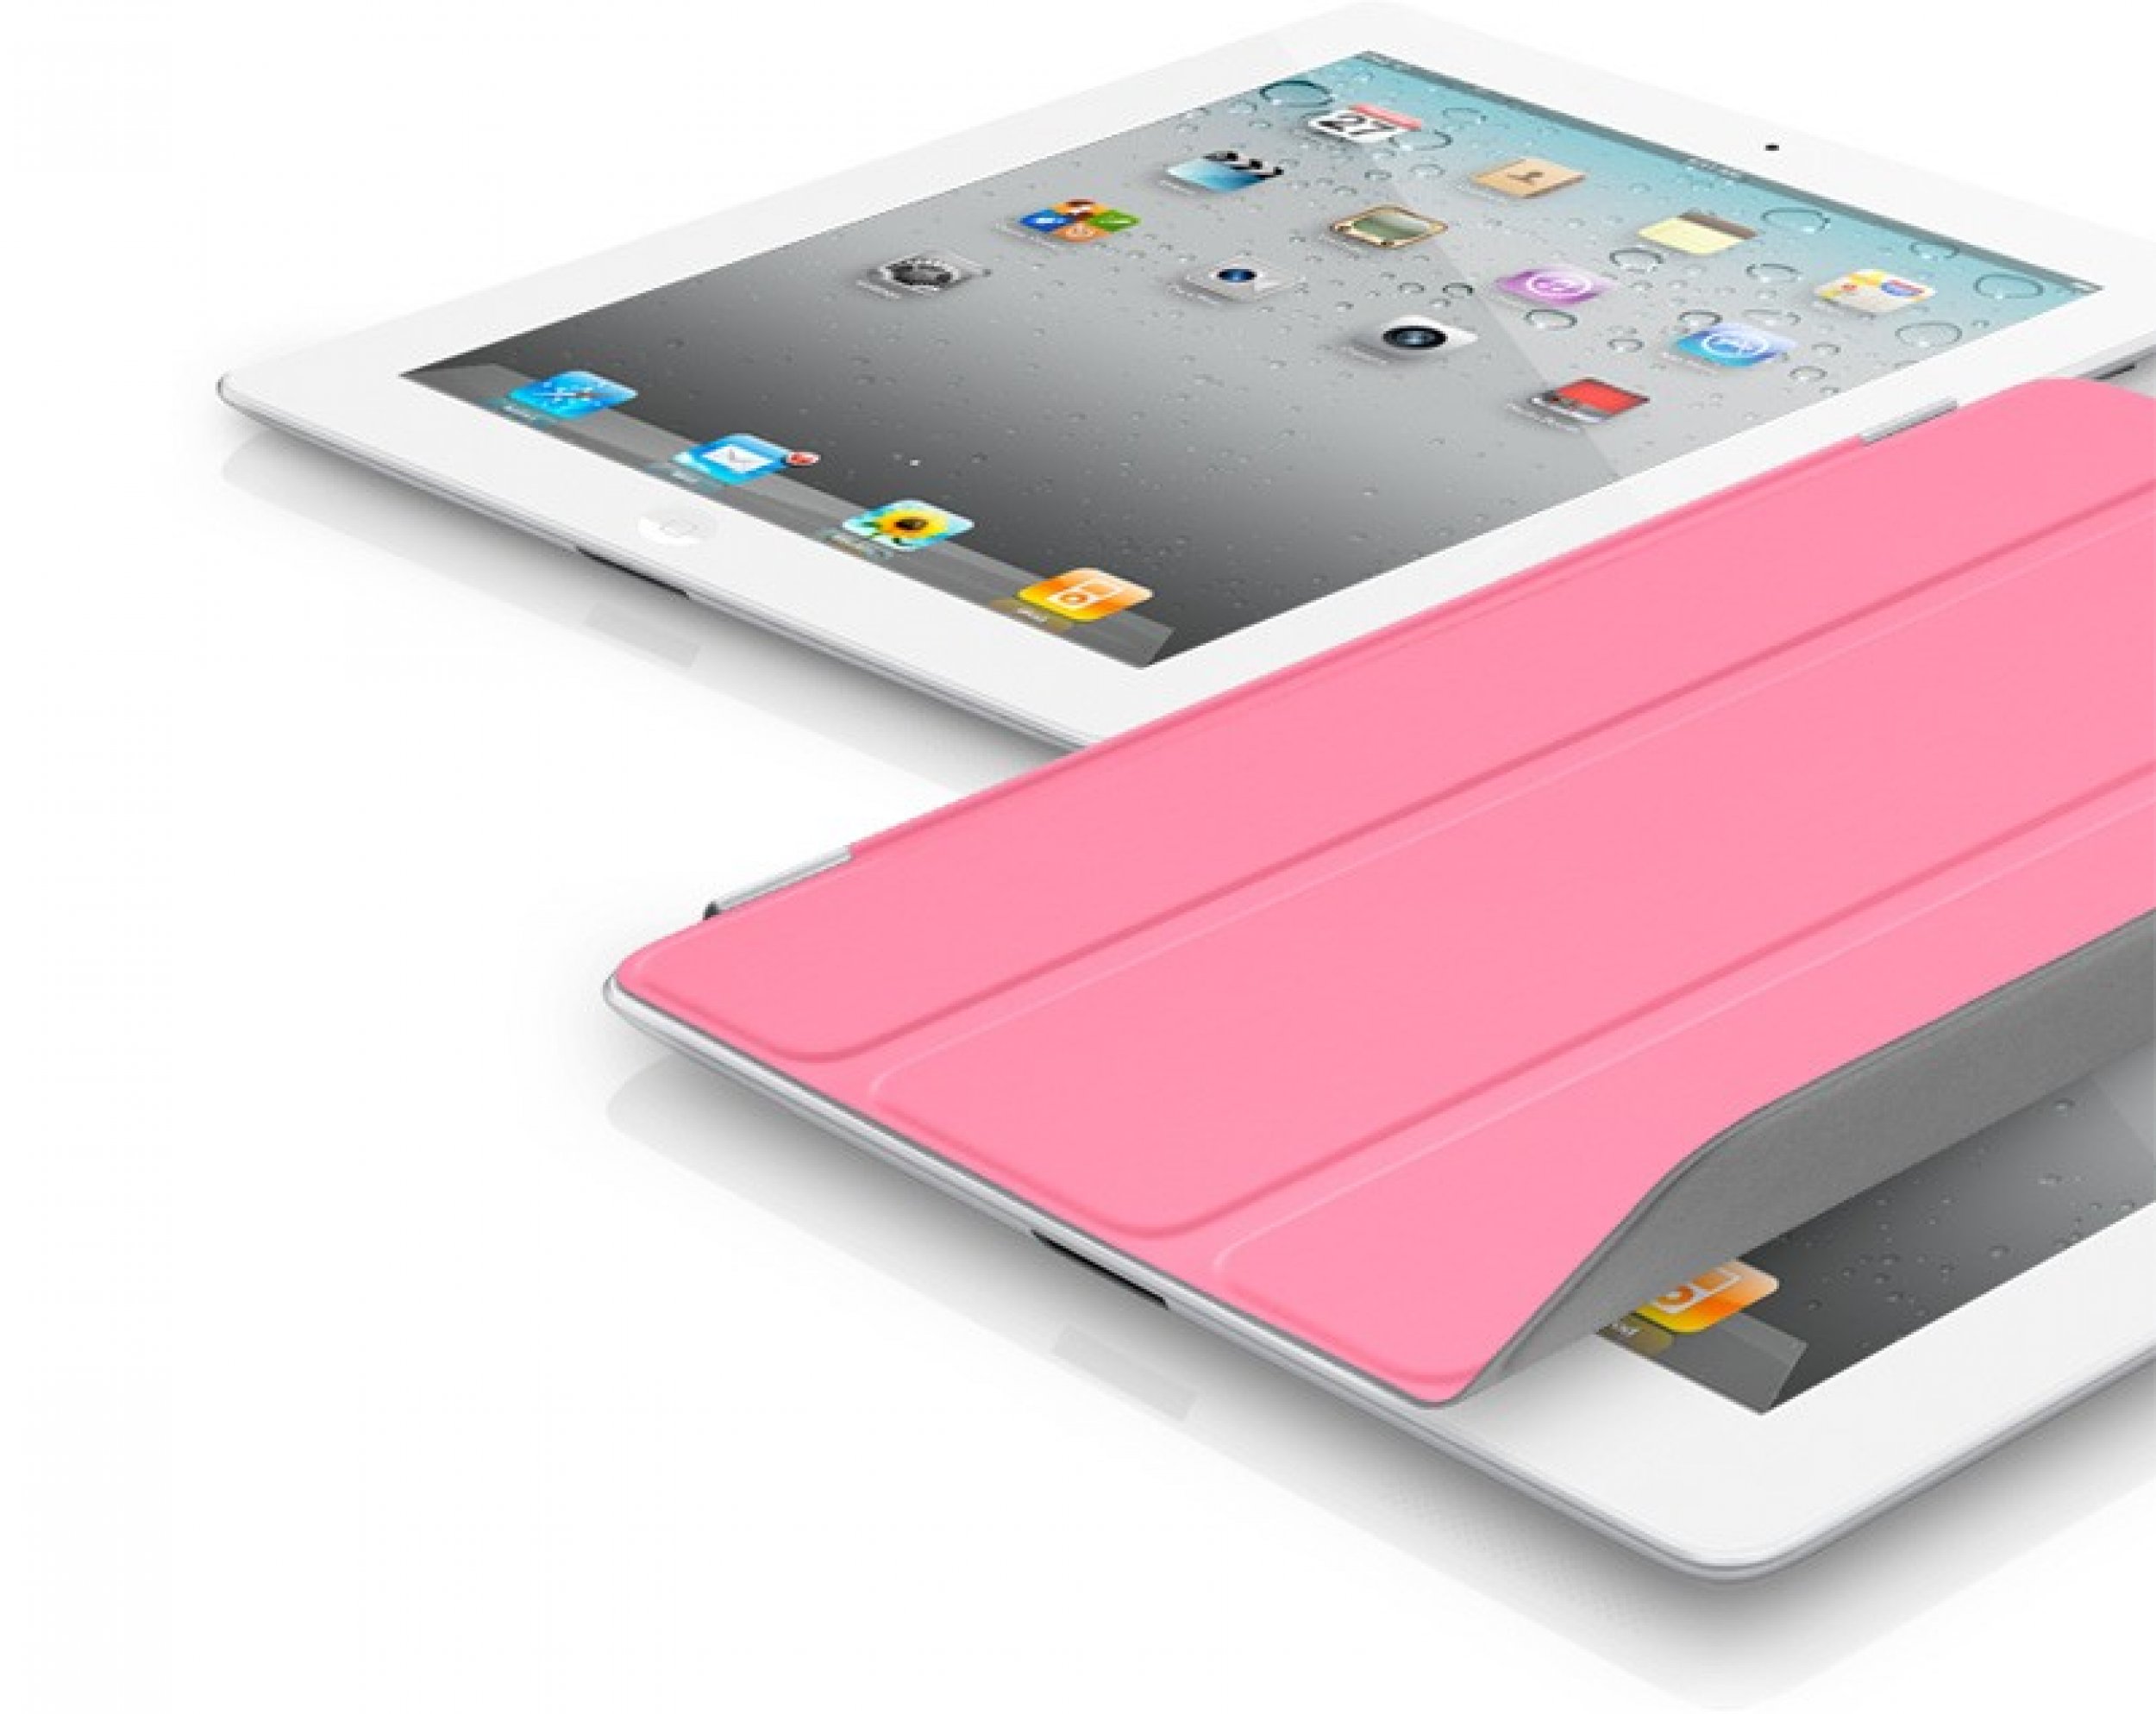 iPad 2 Shows Off New Features and Design